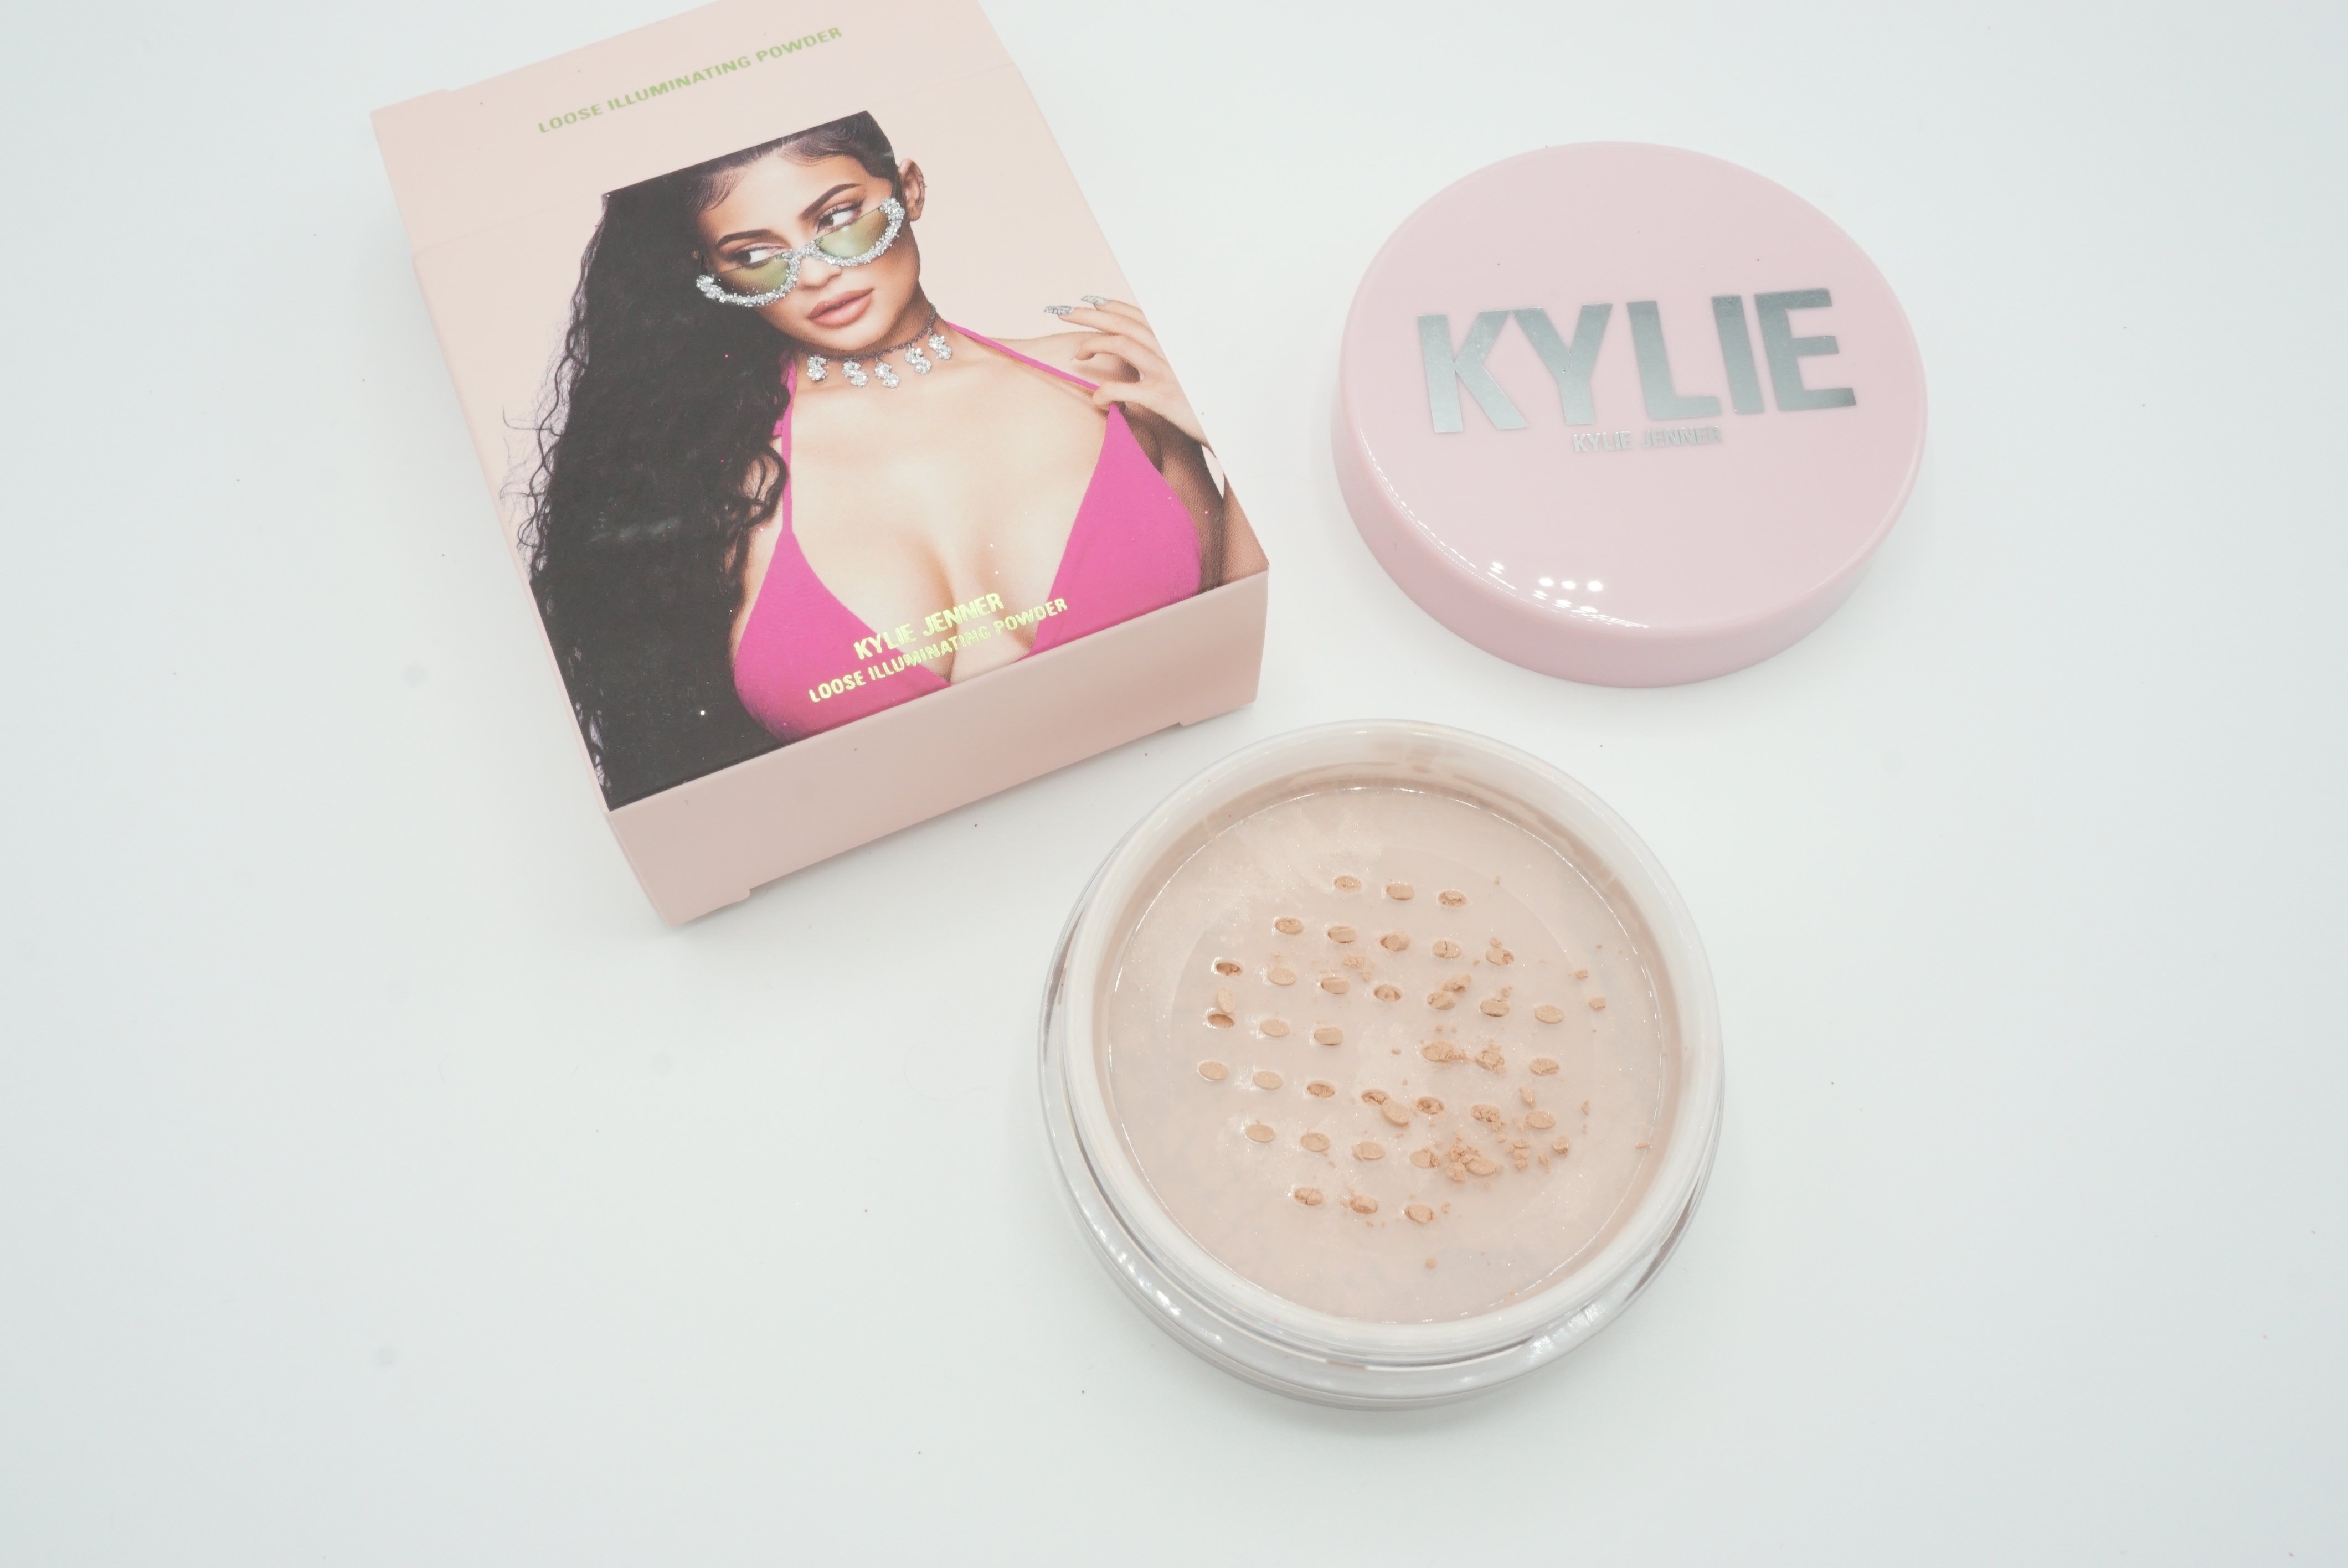 Kylie Cosmetics Birthday Collection 2019 | Loose Illuminating Powder Swatches & Review